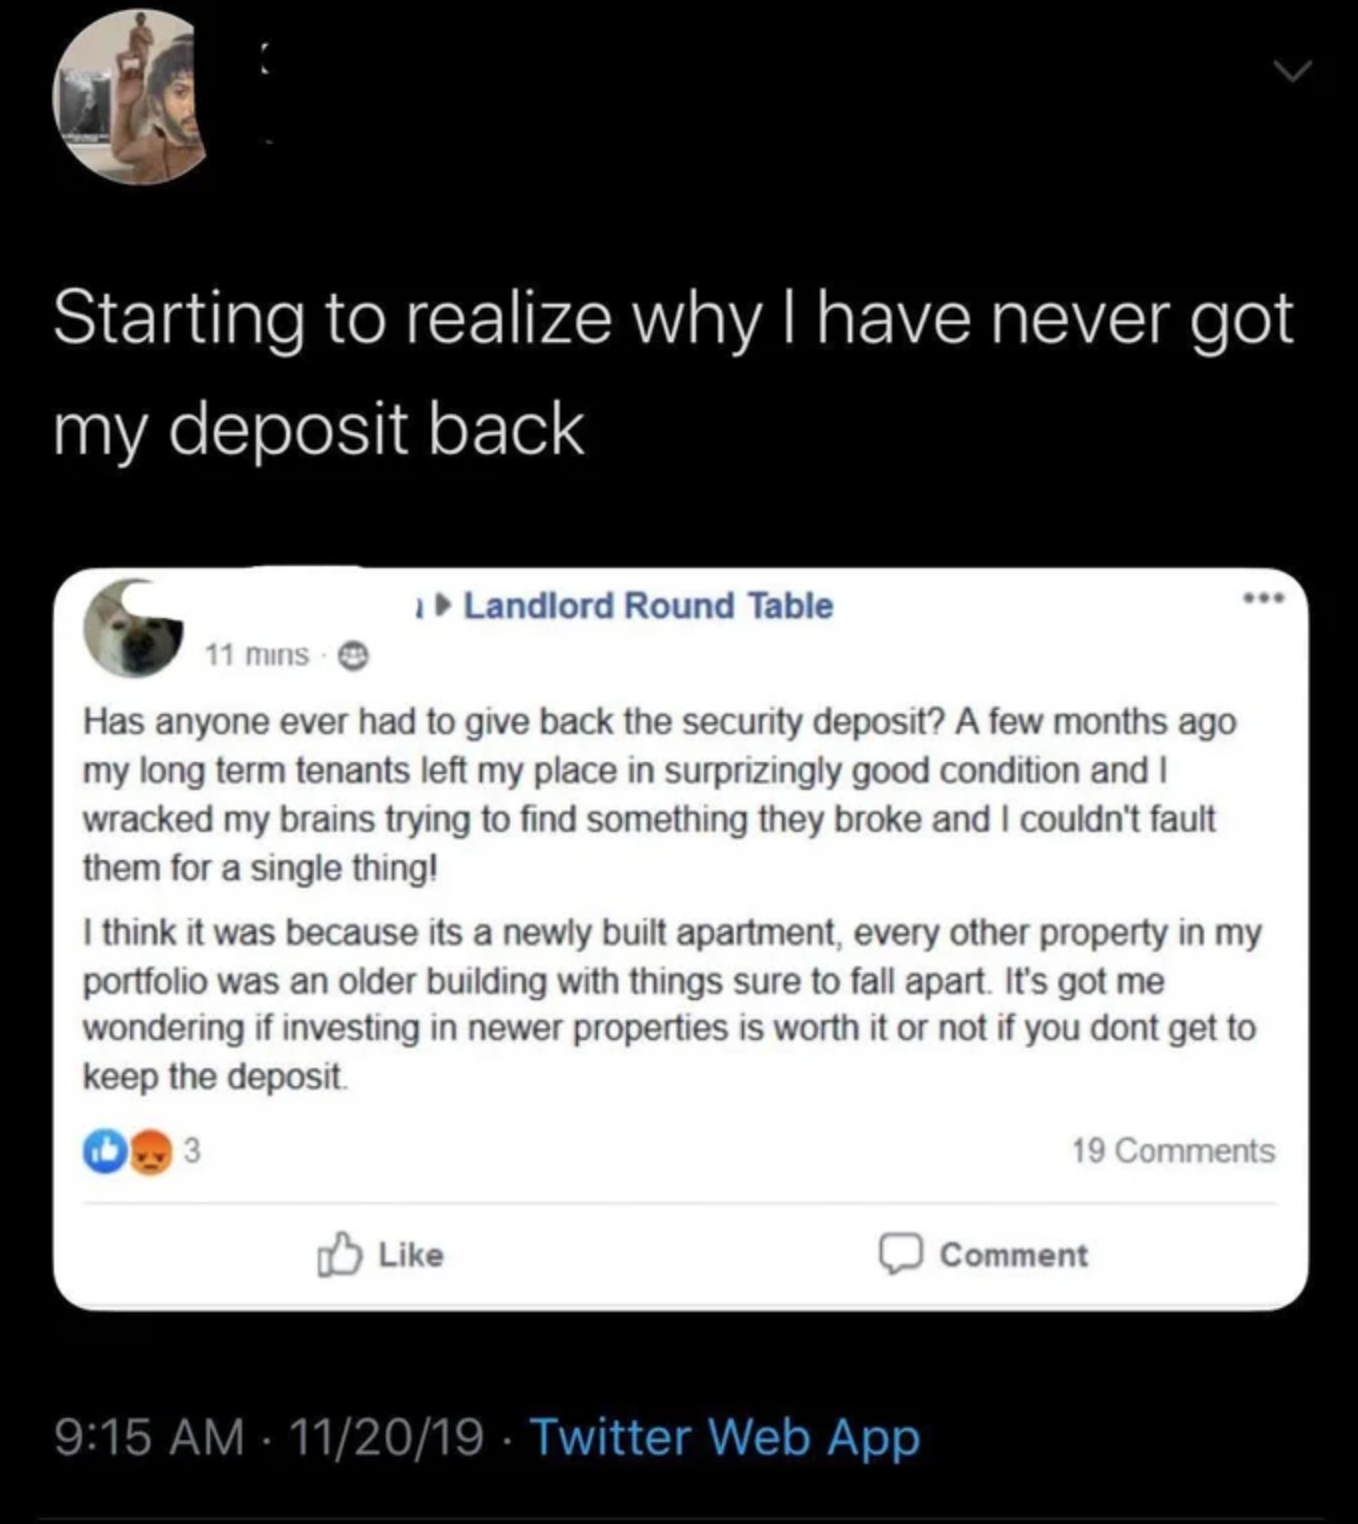 landlord round table - Starting to realize why I have never got my deposit back Landlord Round Table 11 us o Has anyone ever had to give back the security deposit? A few months ago my long term tenants left my place in surprizingly good condition and I wr